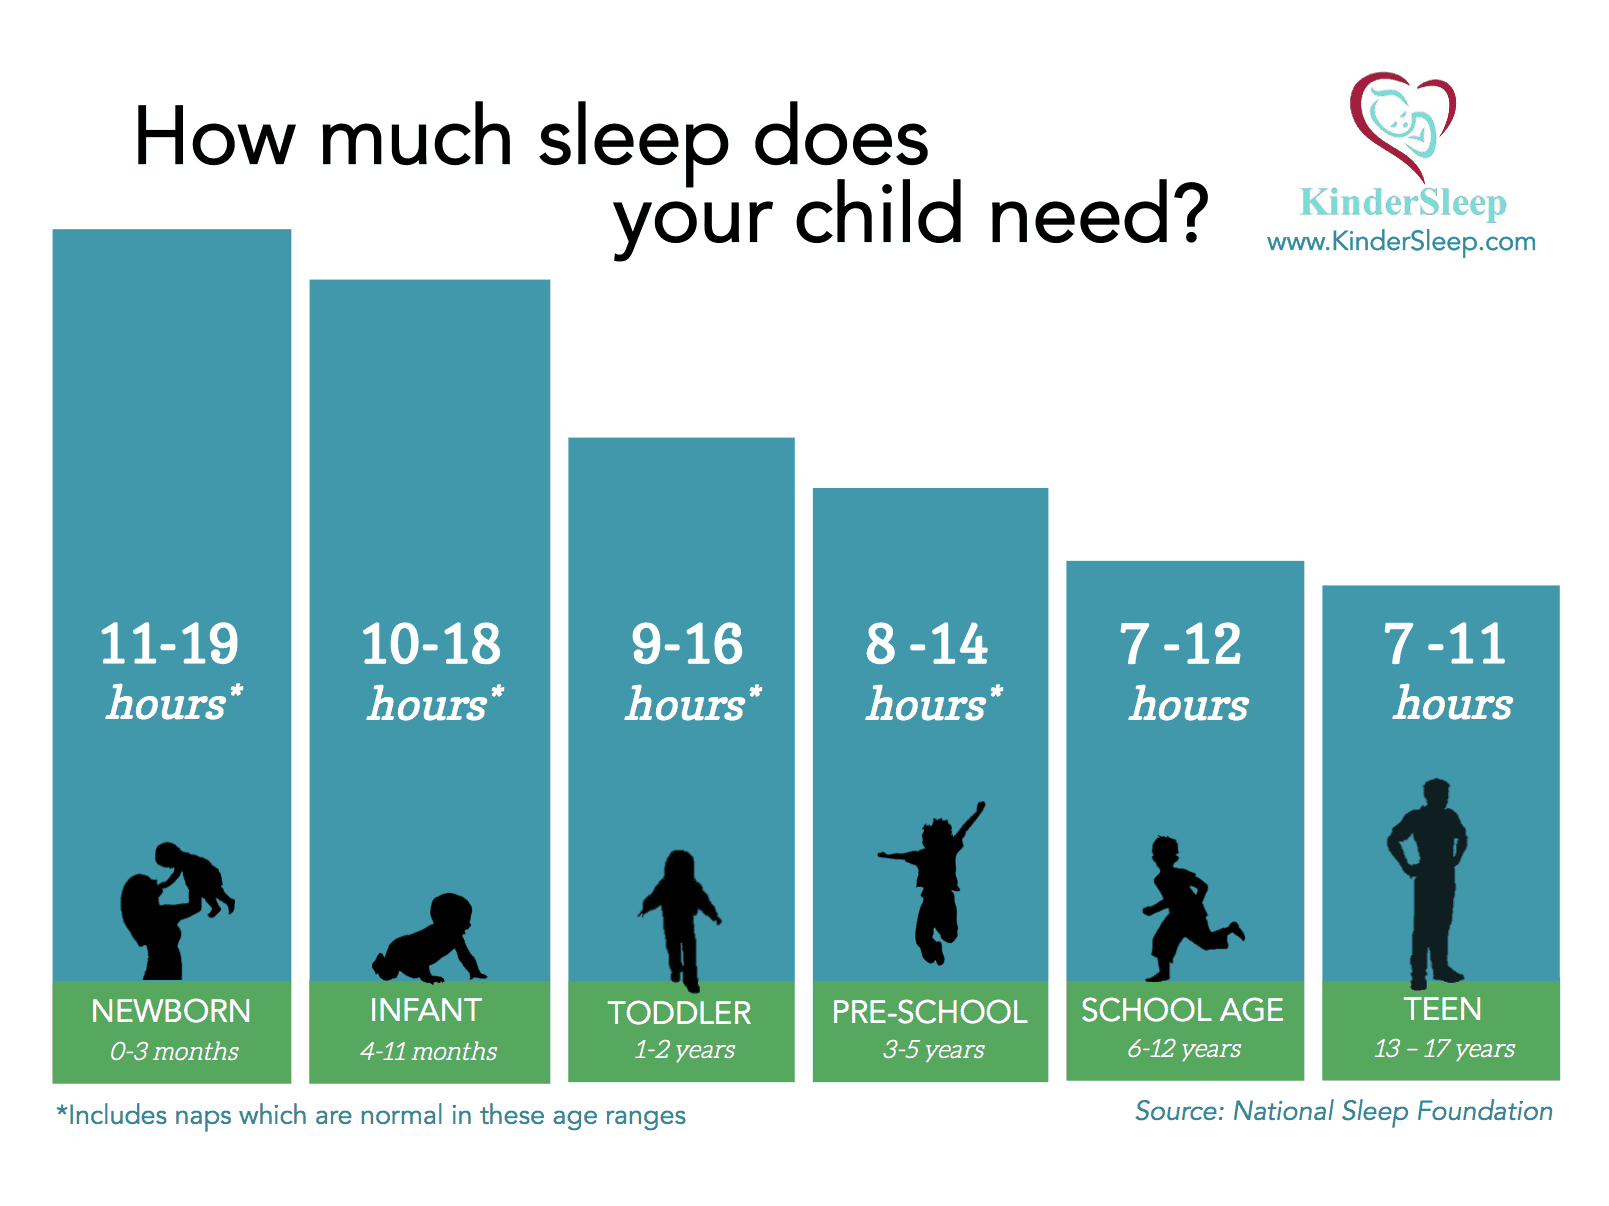 Recommended Sleep Averages have Changed! How Much Sleep Does your Child Really Need?